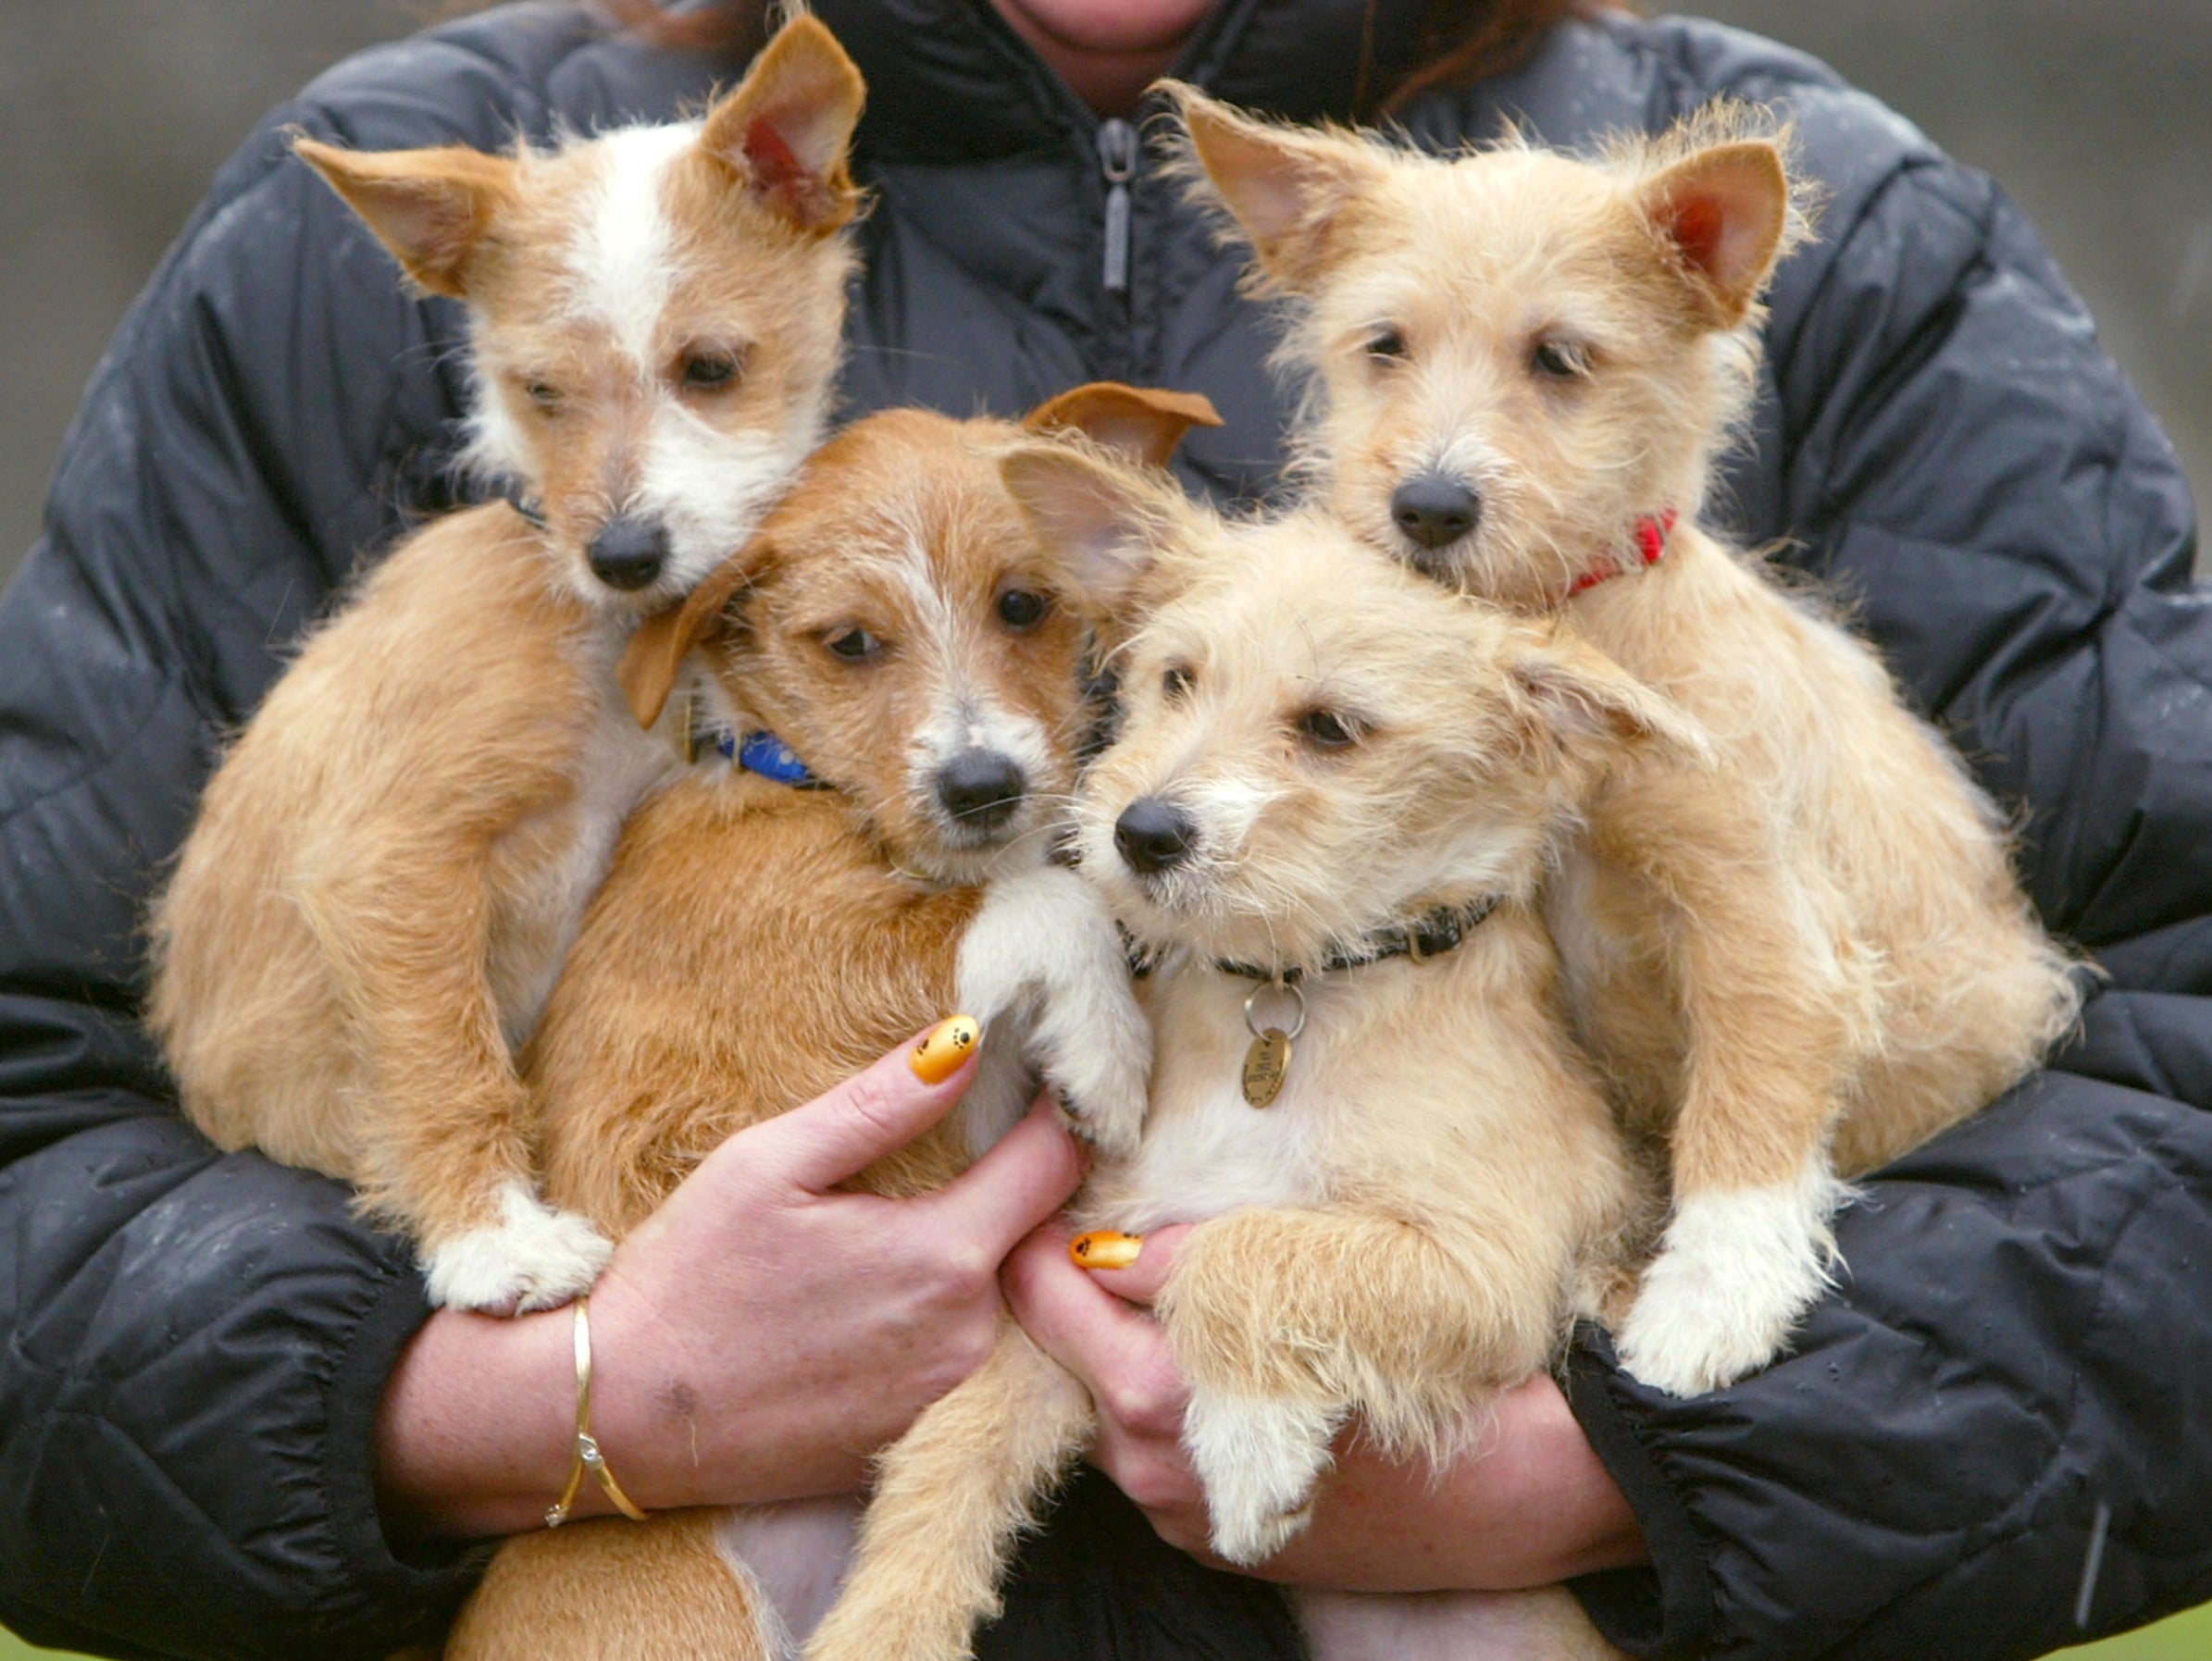 Breeders who fail to microchip puppies before rehoming them will face fines of up to £5,000